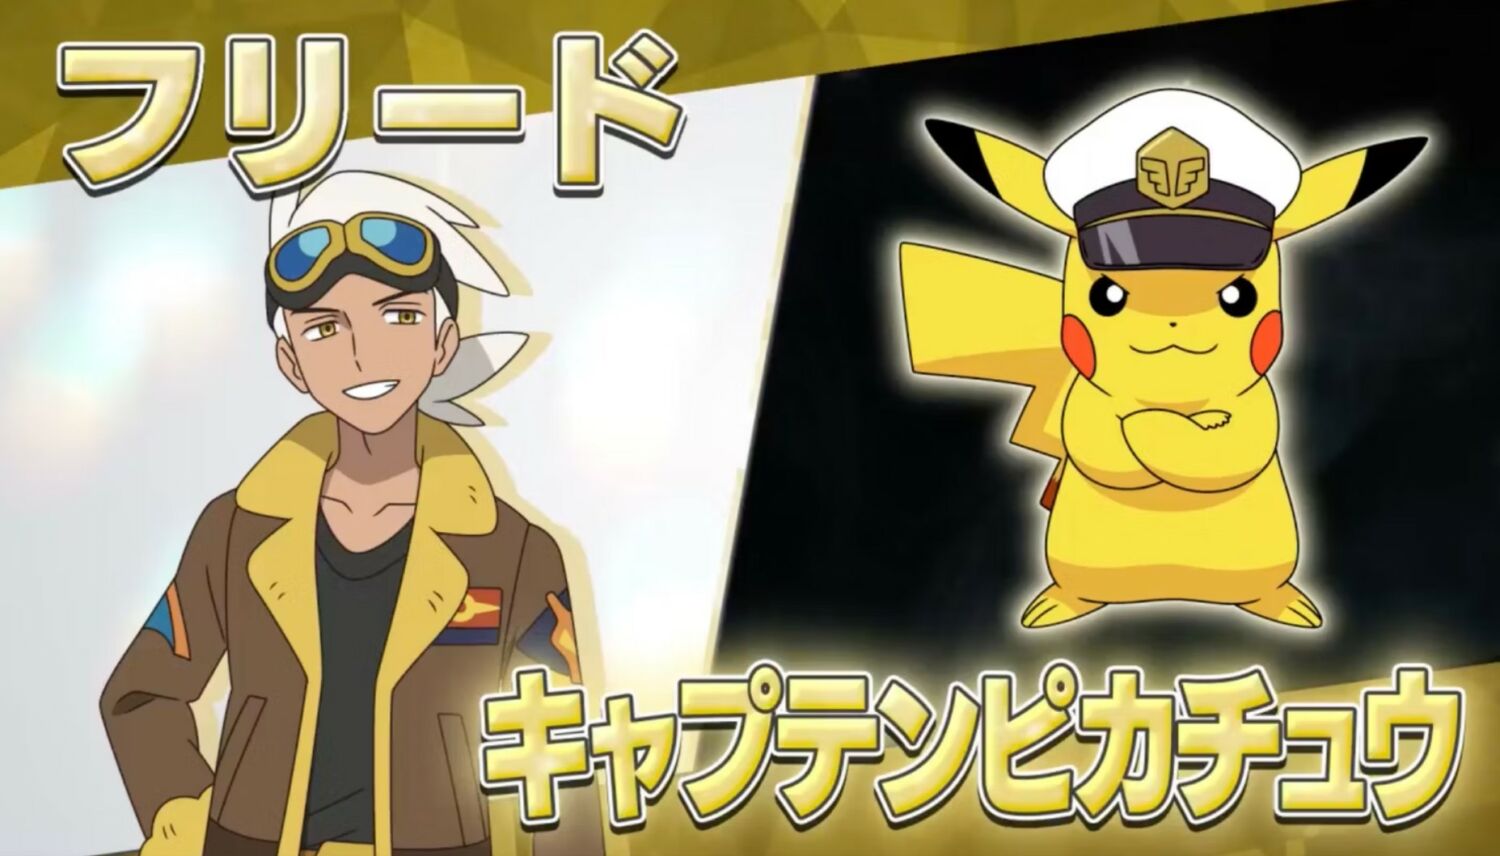 New Pokémon Anime Without Ash Lands First Trailer | Geek Culture